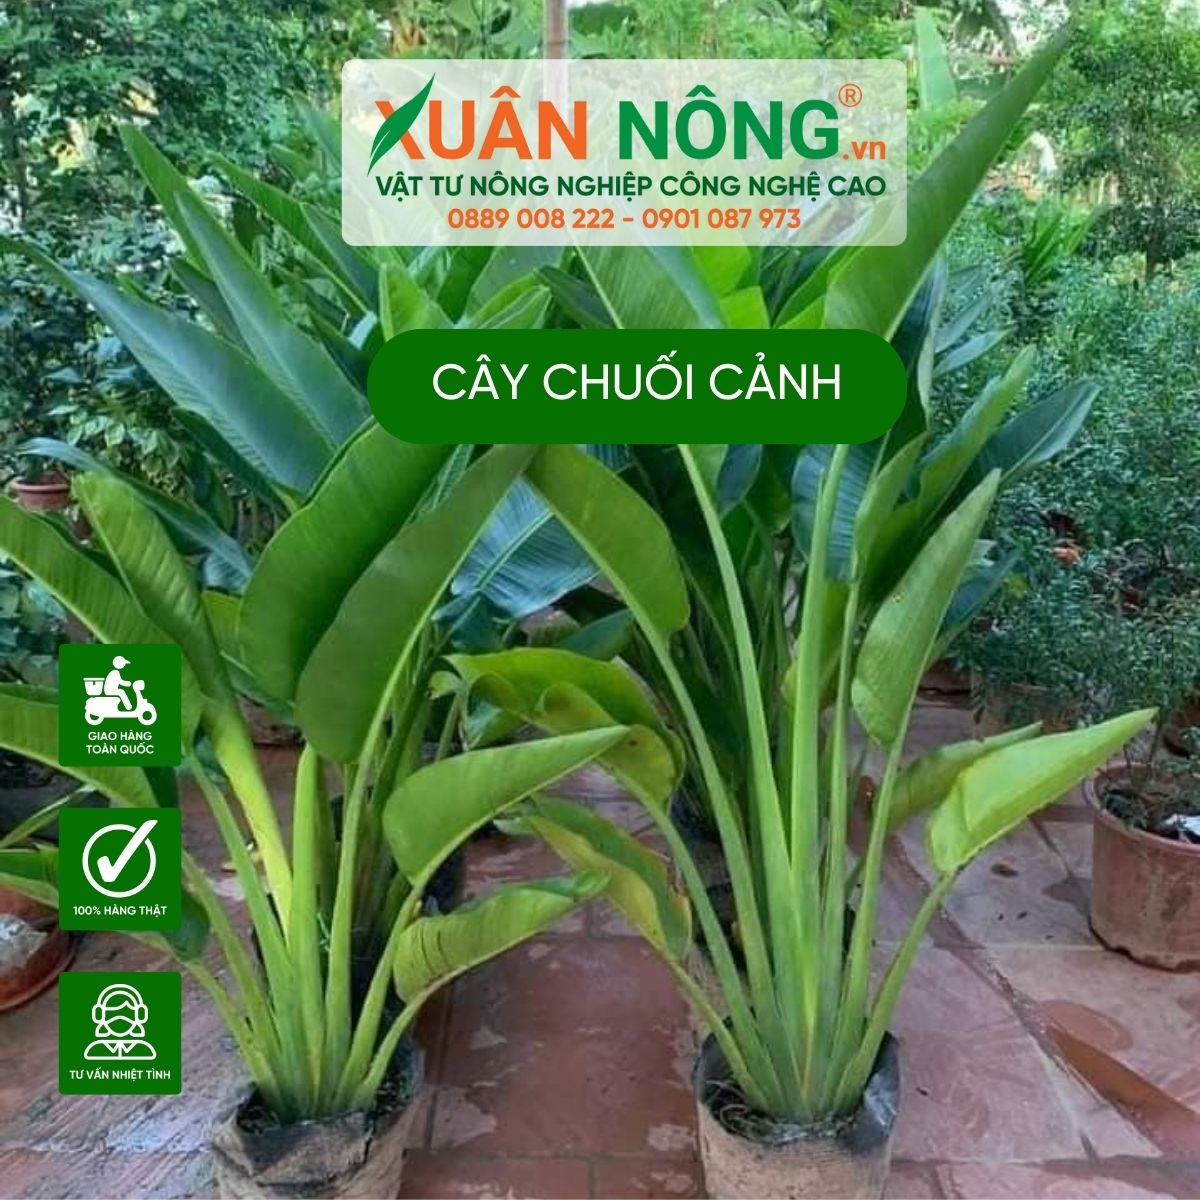 cach-trong-cay-chuoi-canh